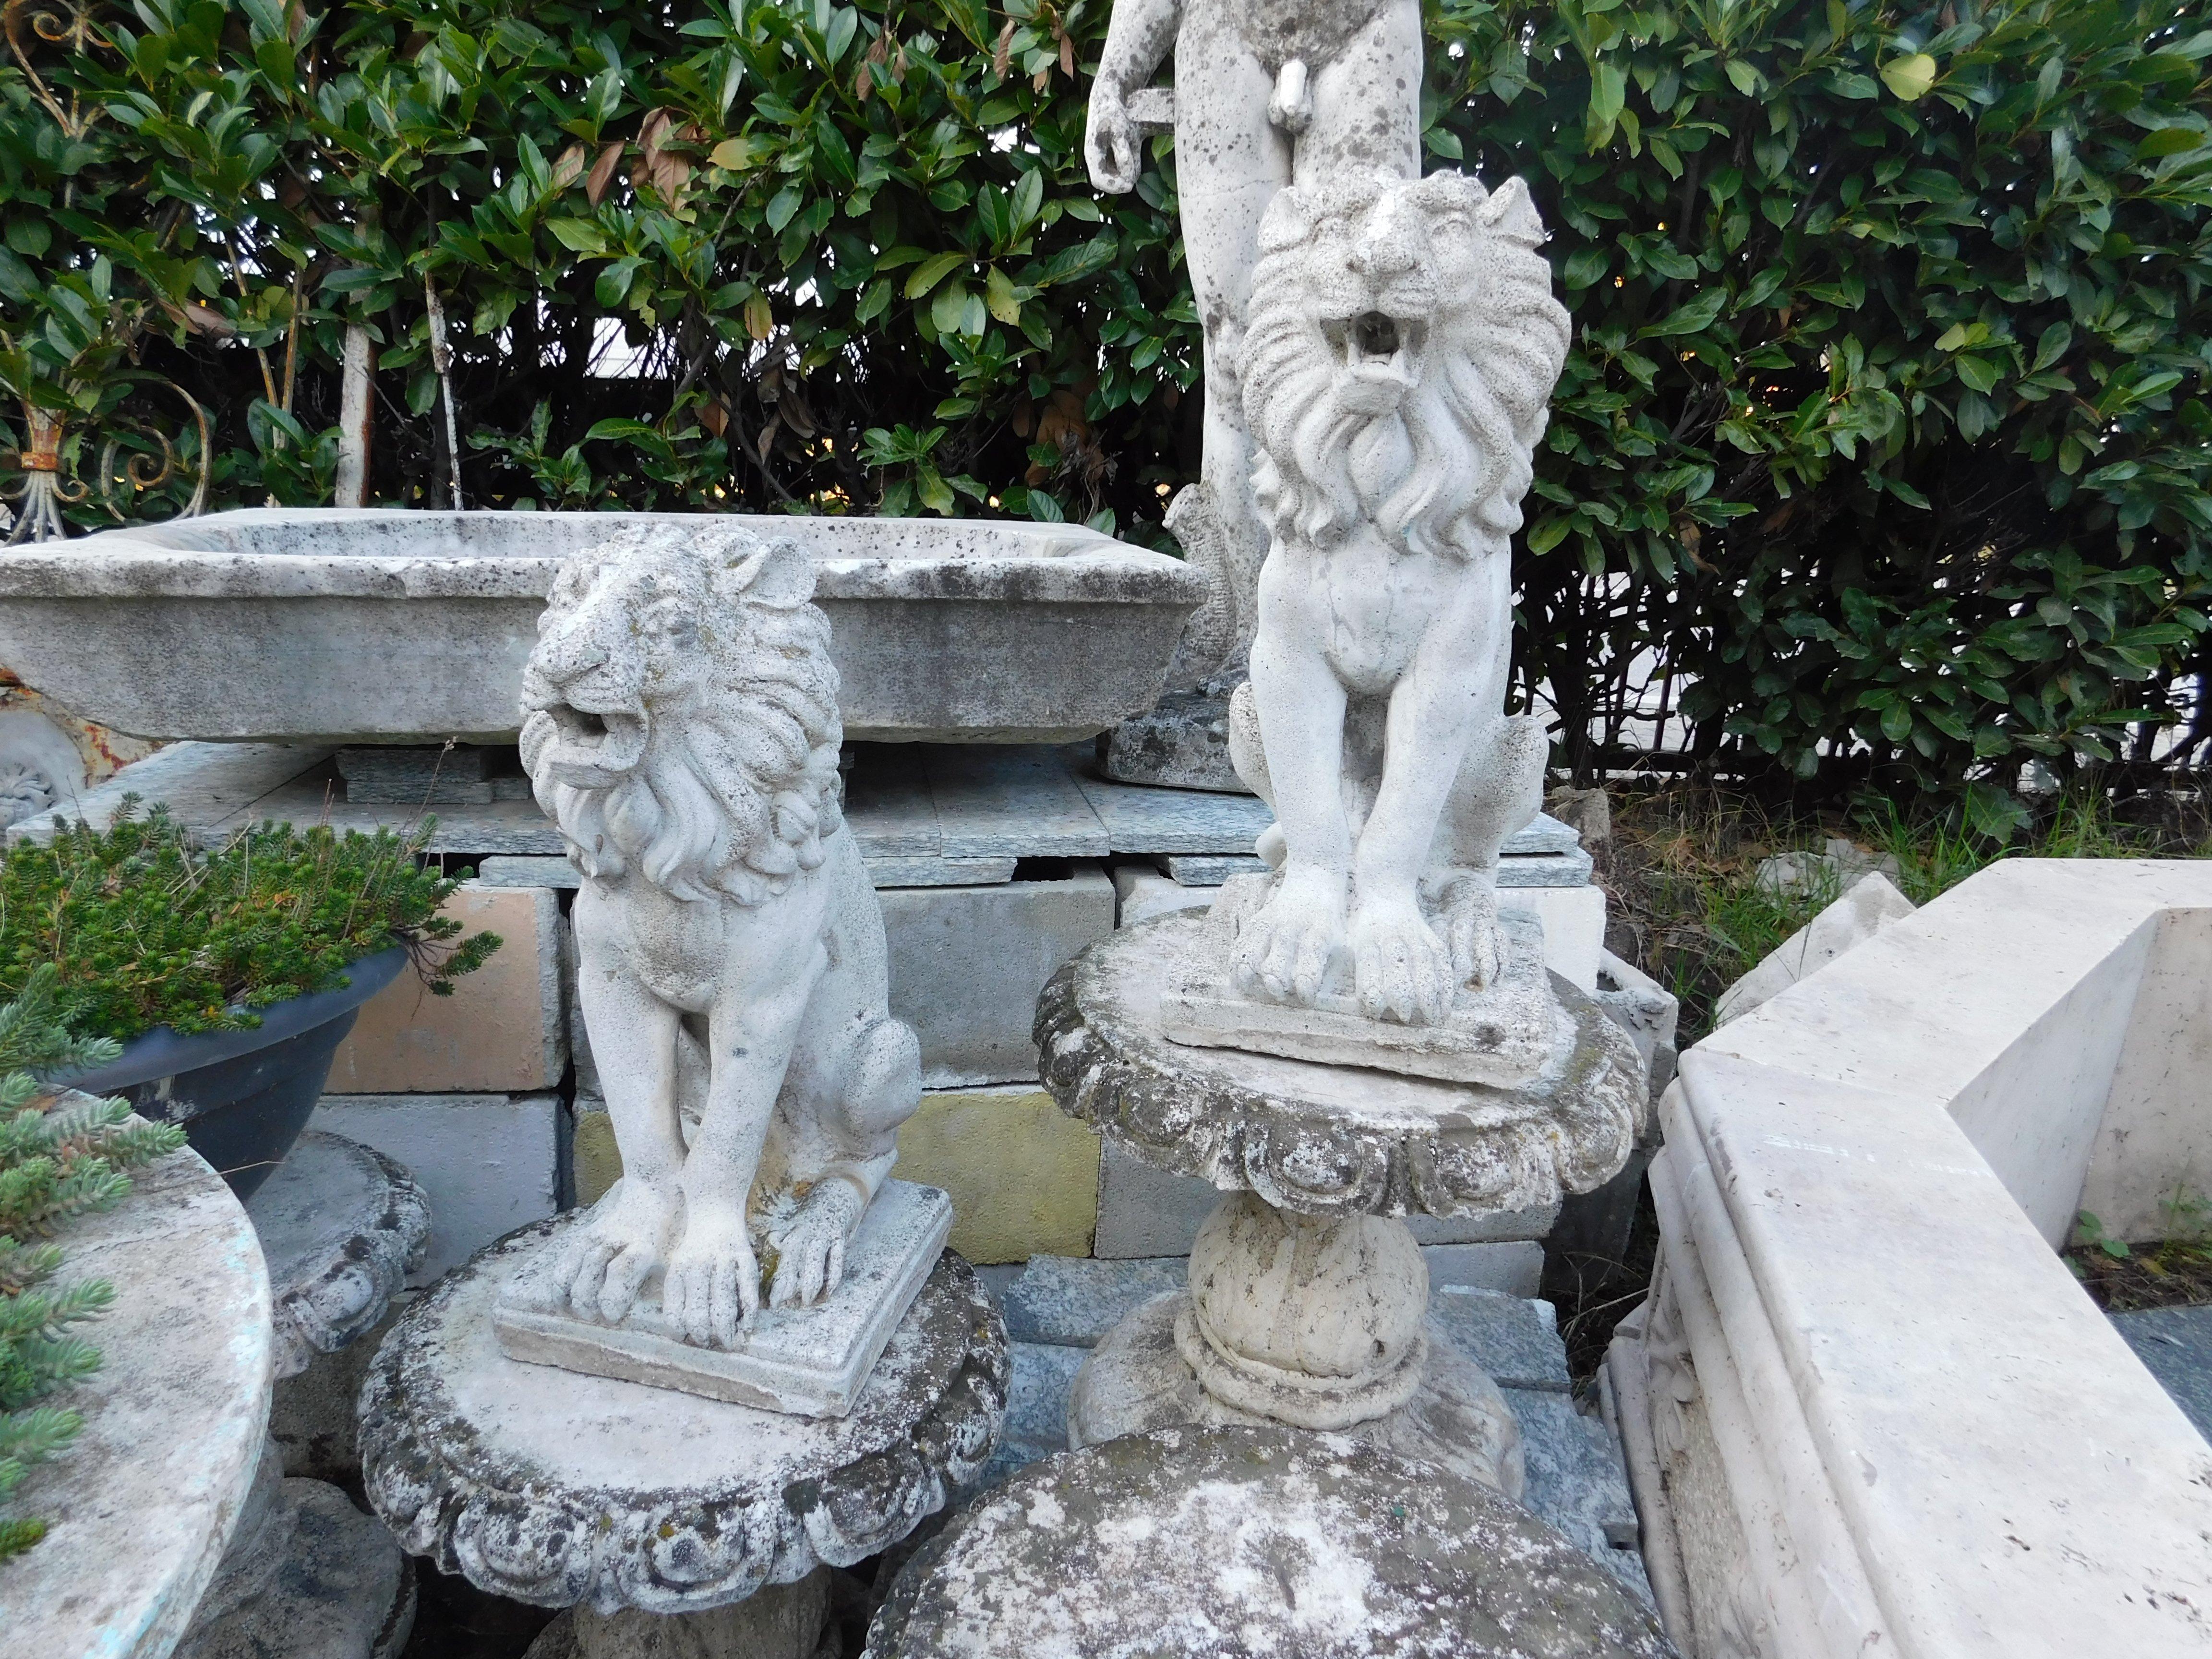 Pair of vintage lions in concrete, built for garden or outdoor furniture (can also be positioned above columns in the entrance), built in the 1900s in Italy, measuring cm W 25 x D 35 x H 52.